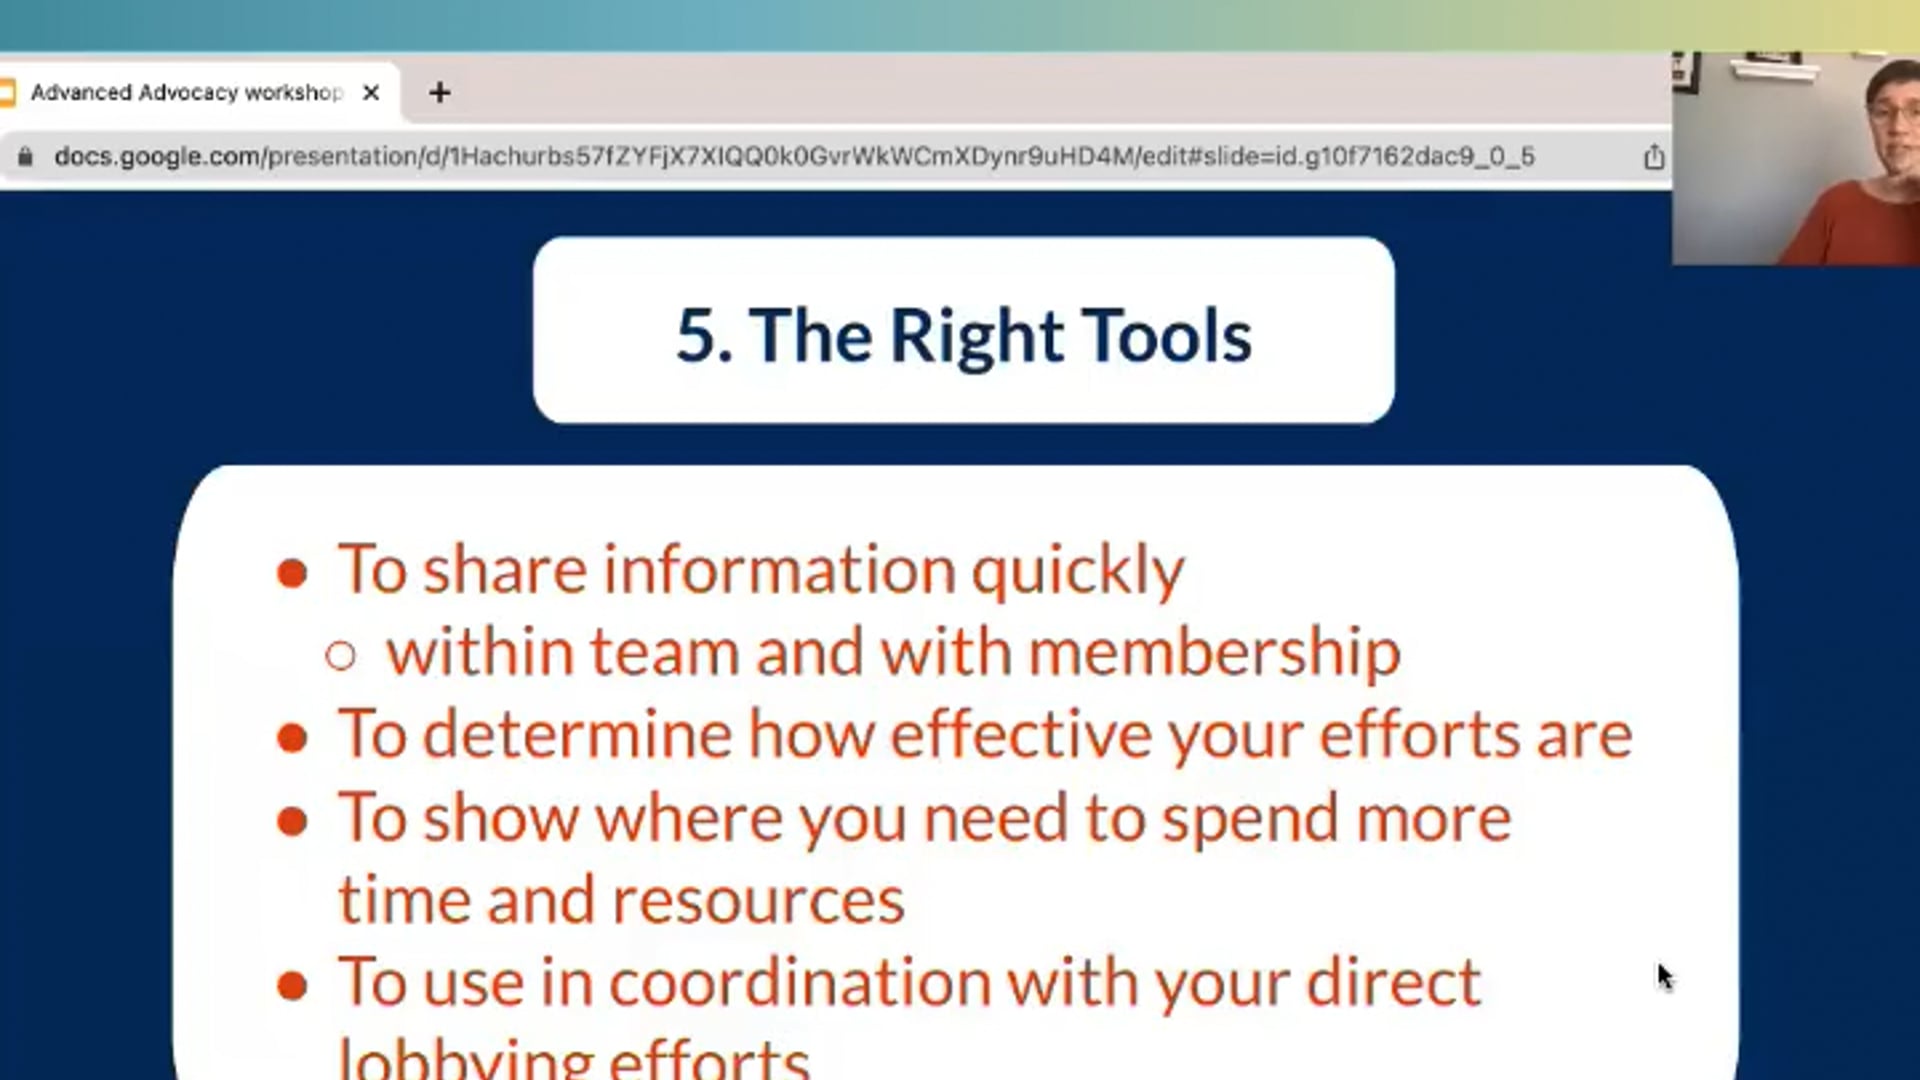 The Right Tools Will Shape Your Campaign